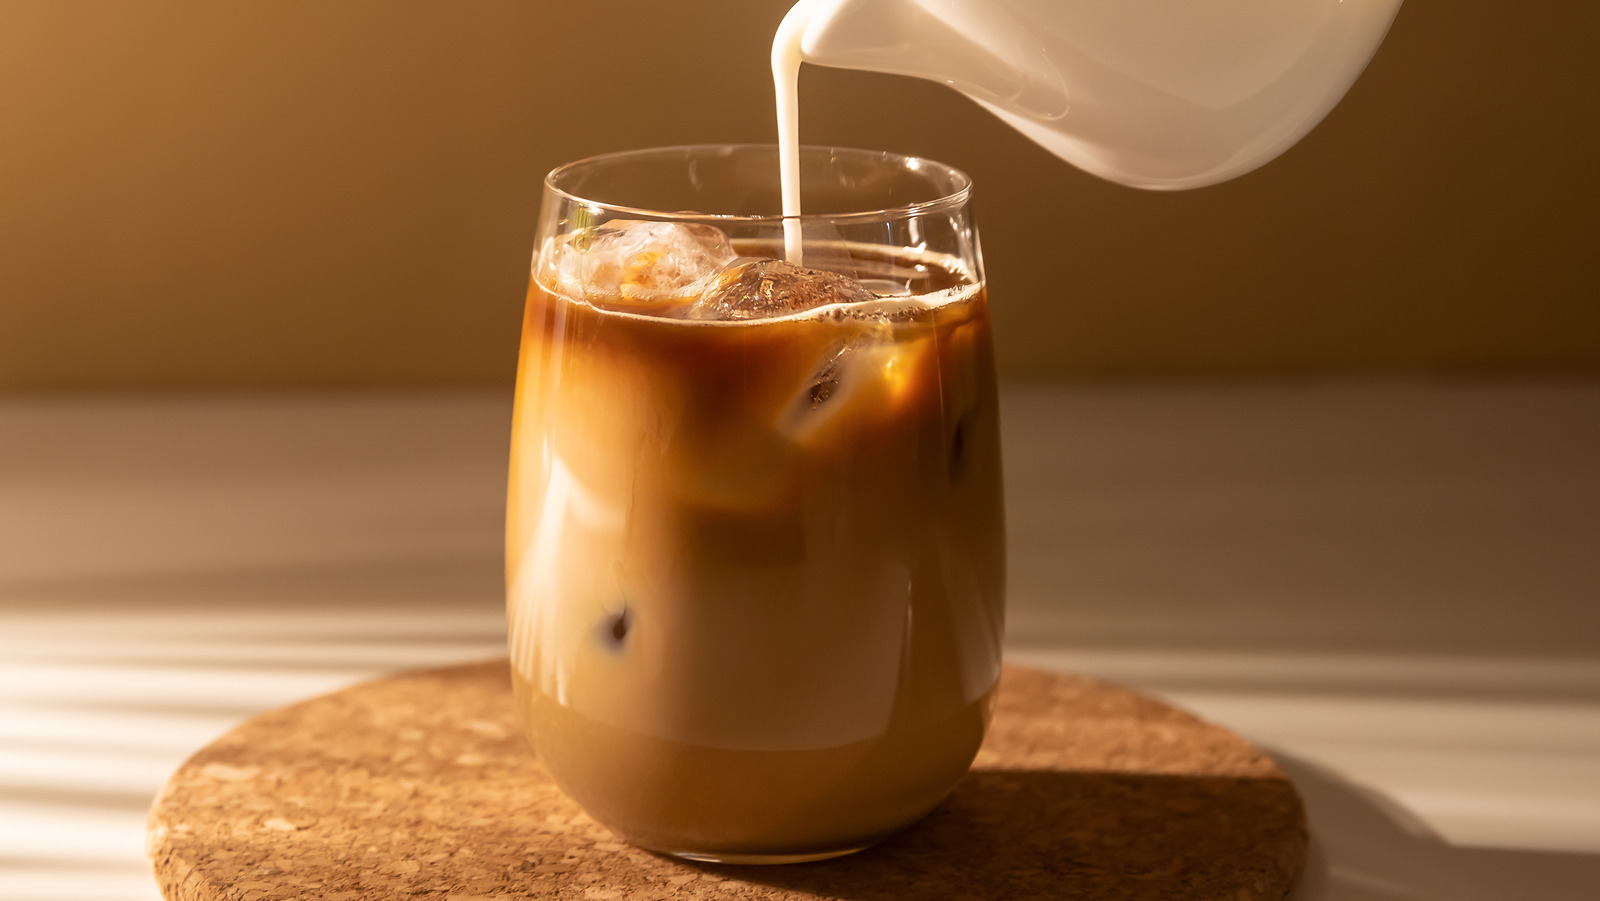 Tried out my new iced coffee maker today. Works very nicely : r/aldi